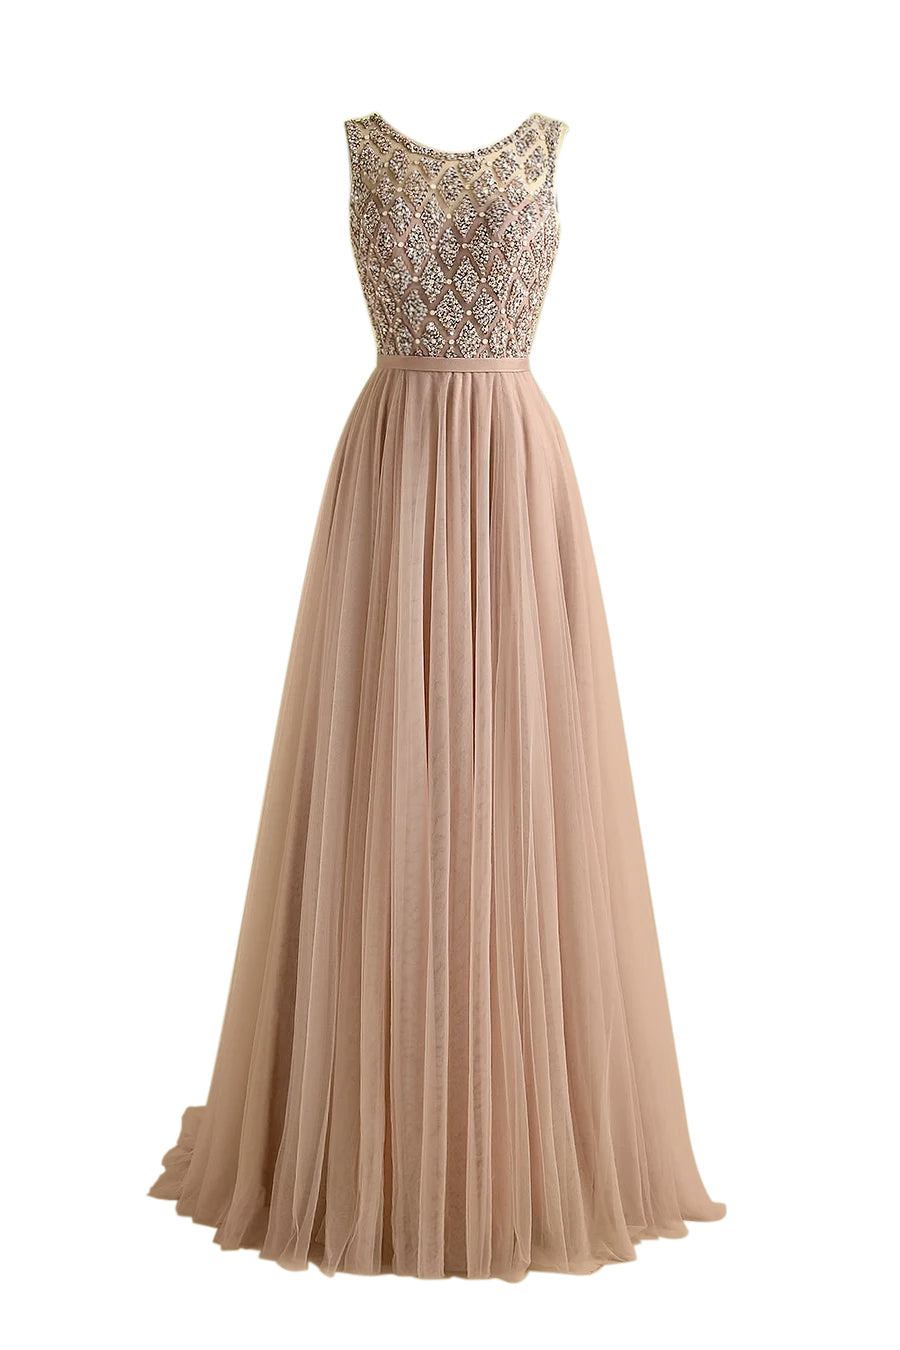 Sparkly Beaded Long Tulle Bridesmaid Prom Dress